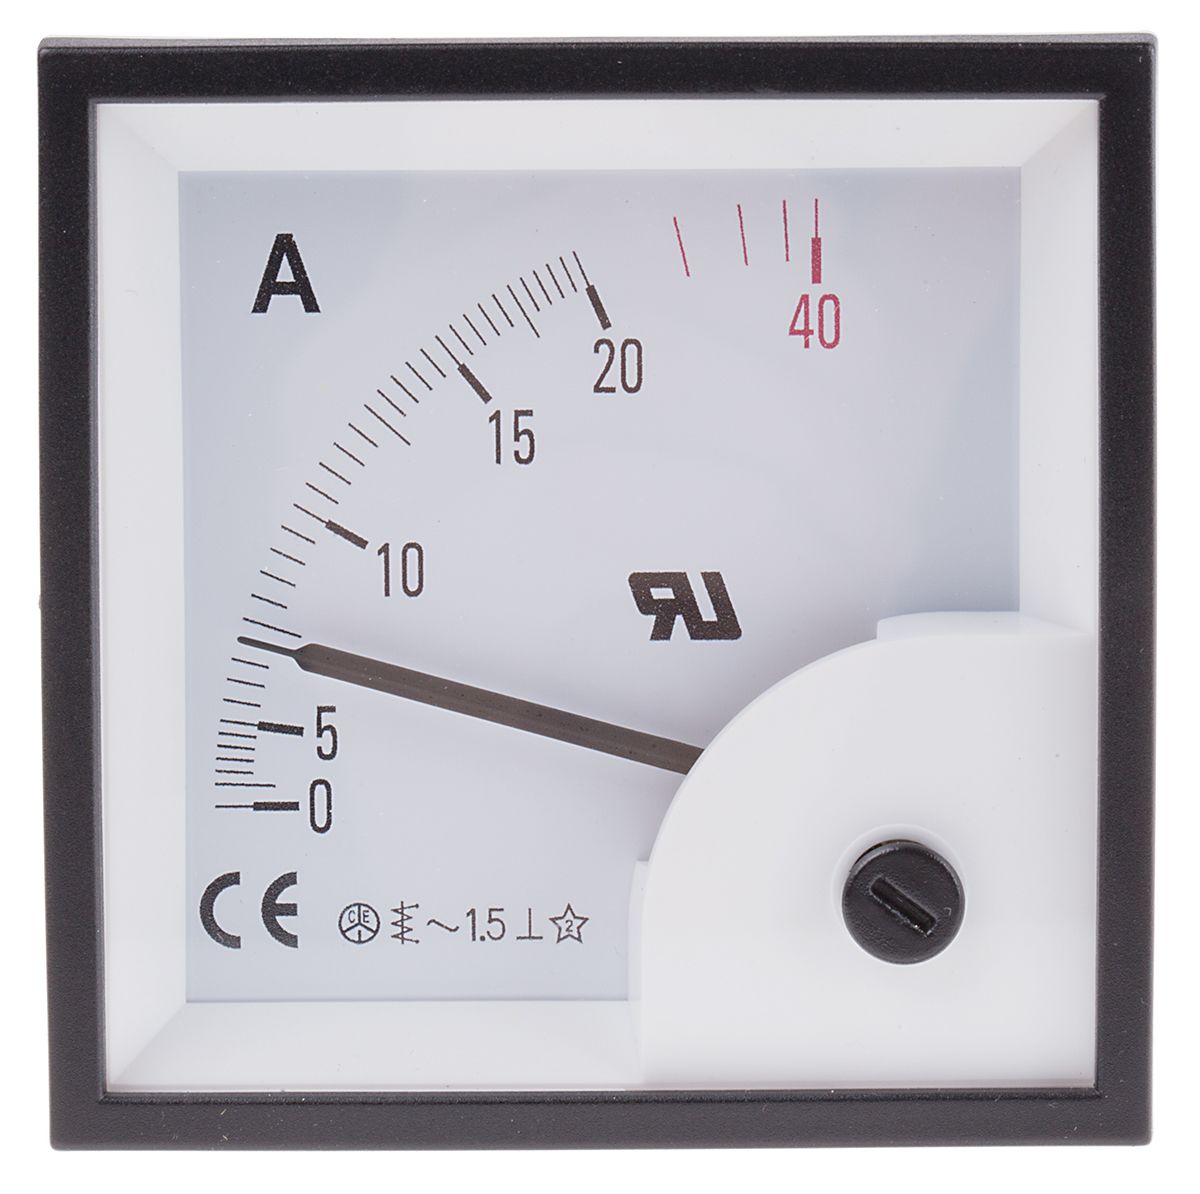 RS PRO Analogue Panel Ammeter 40A AC, 68mm x 68mm, ±1.5 % Moving Iron